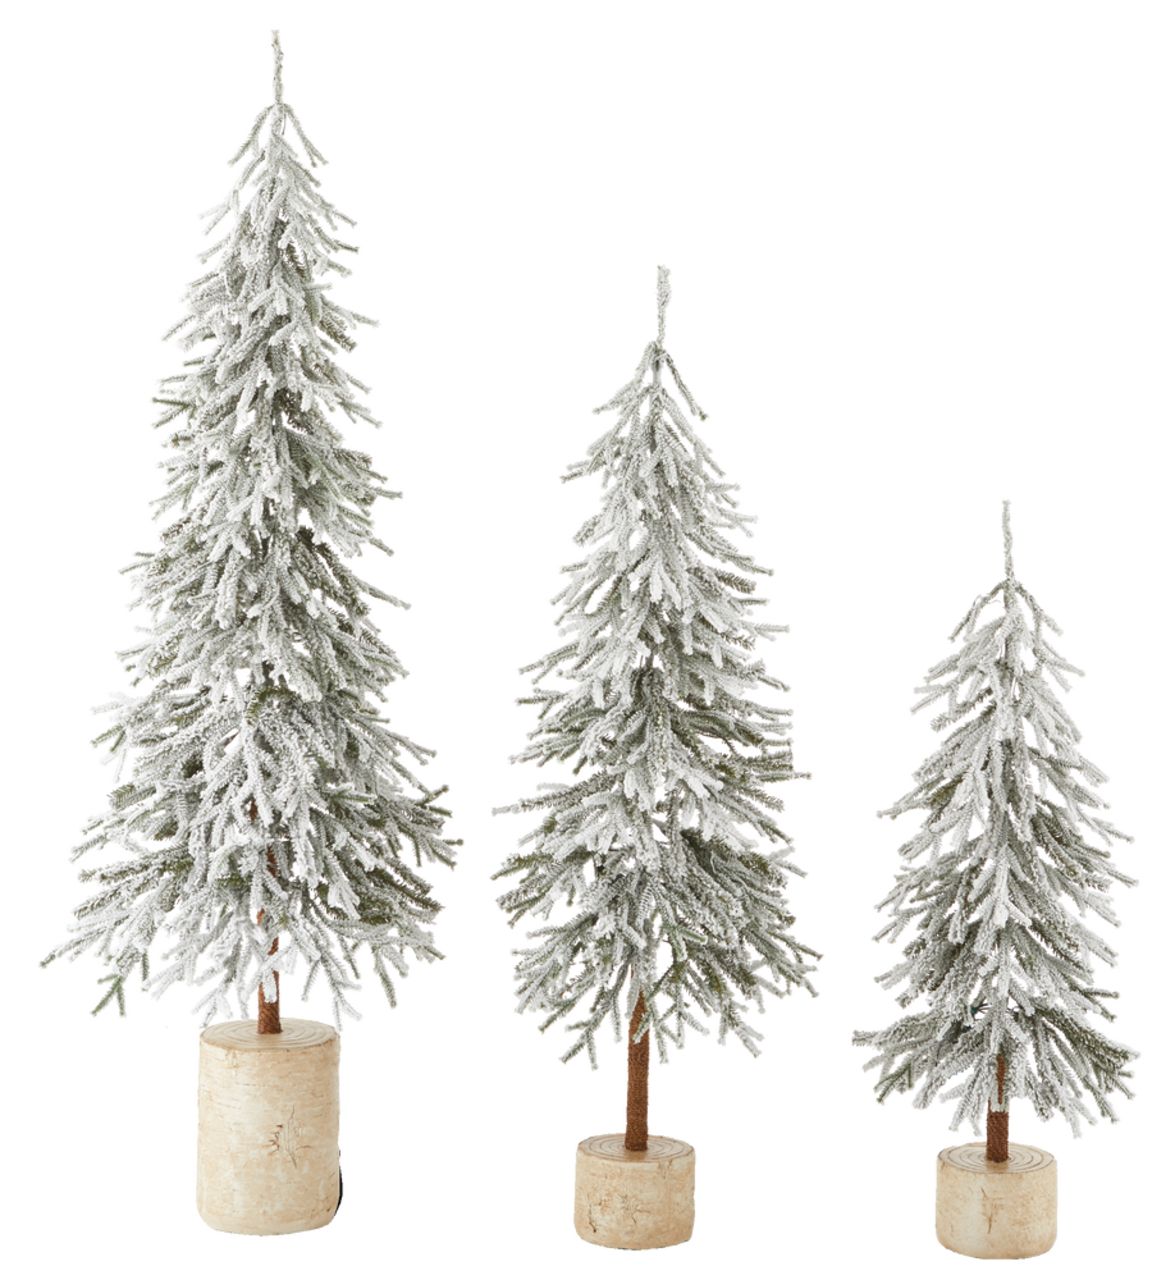 CANVAS Flocked Downswept Pre-Lit Potted Trees, 3-pk | Canadian Tire